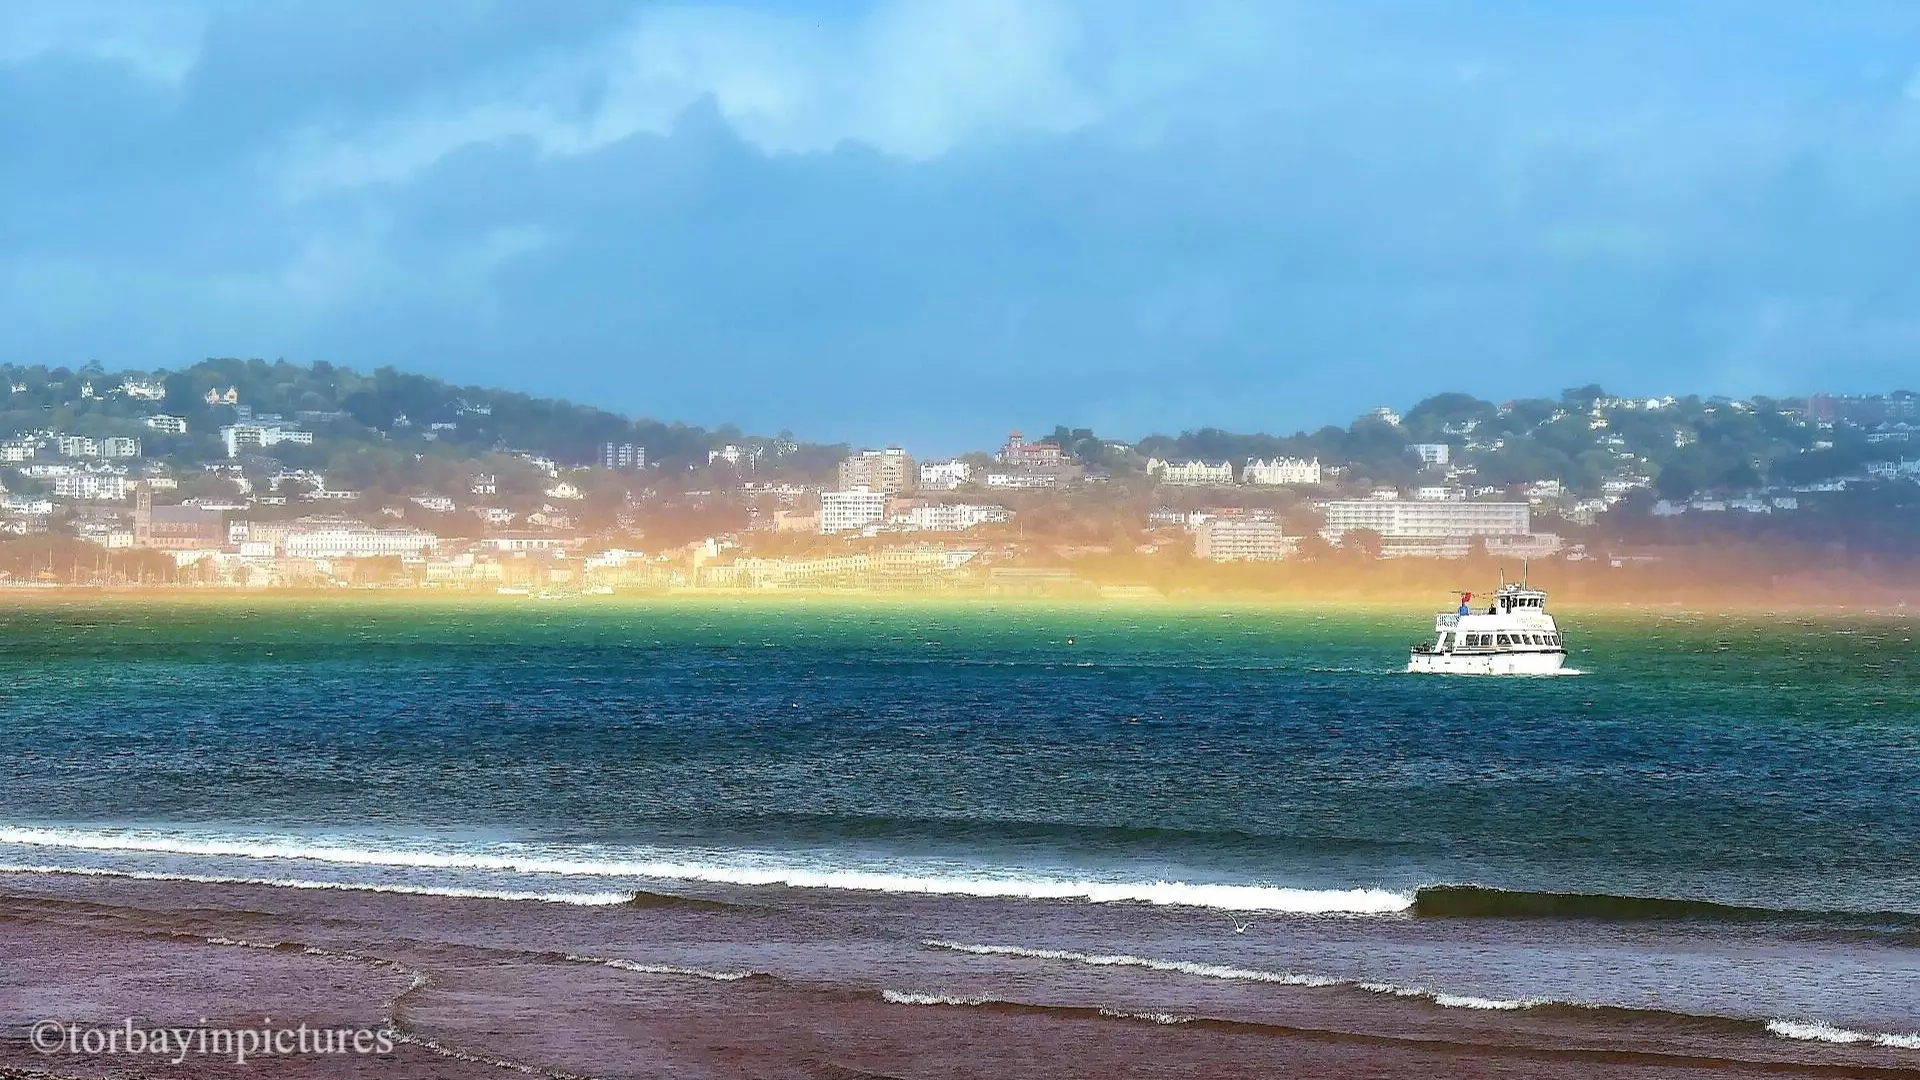 Amazing Flat Rainbow Spotted Off The Coast Of Devon After Storm Francis